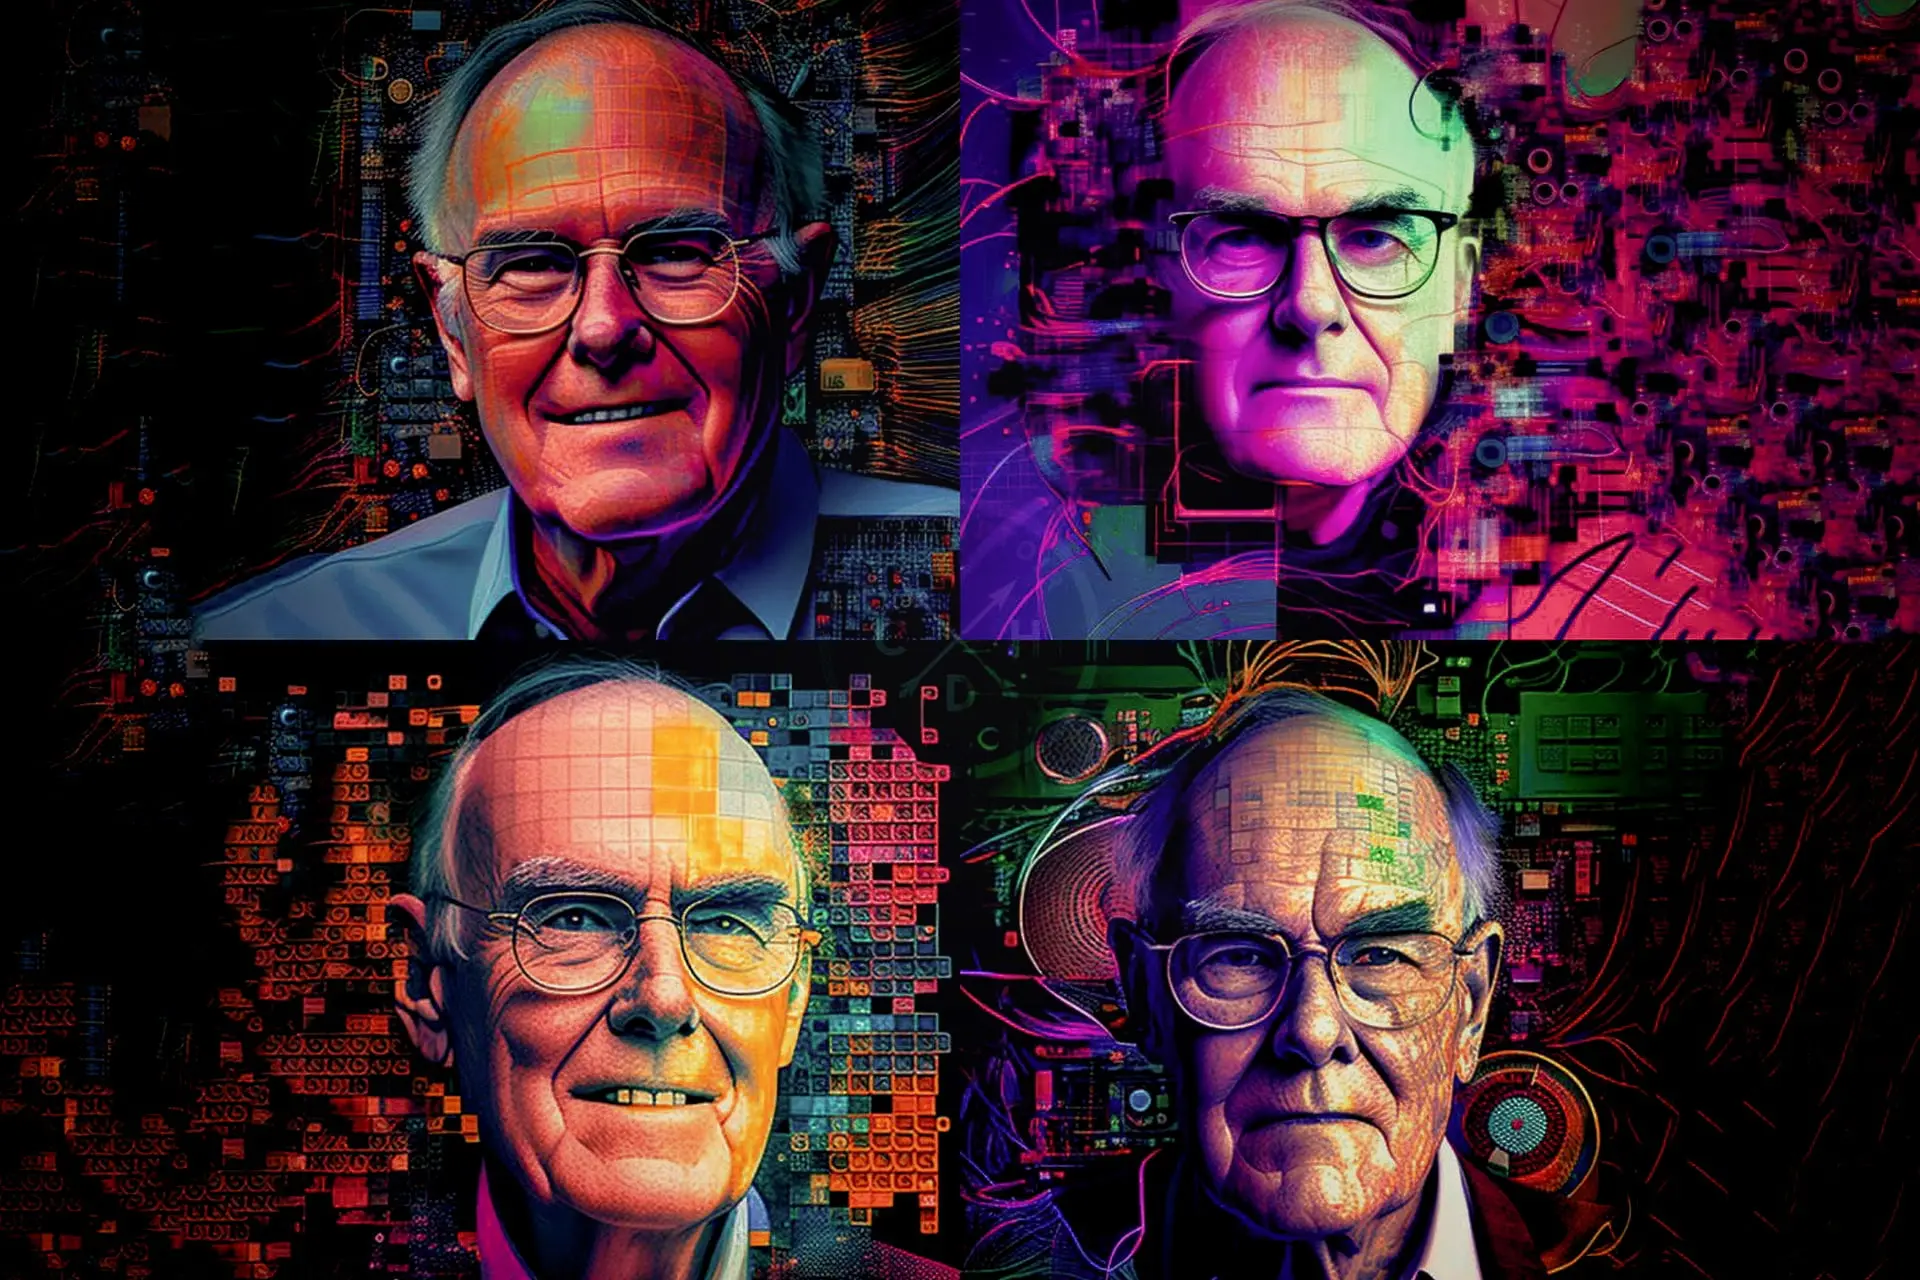 Gordon Moore; the founder of Intel, creator of Moore’s Law, and the architect of the modern world